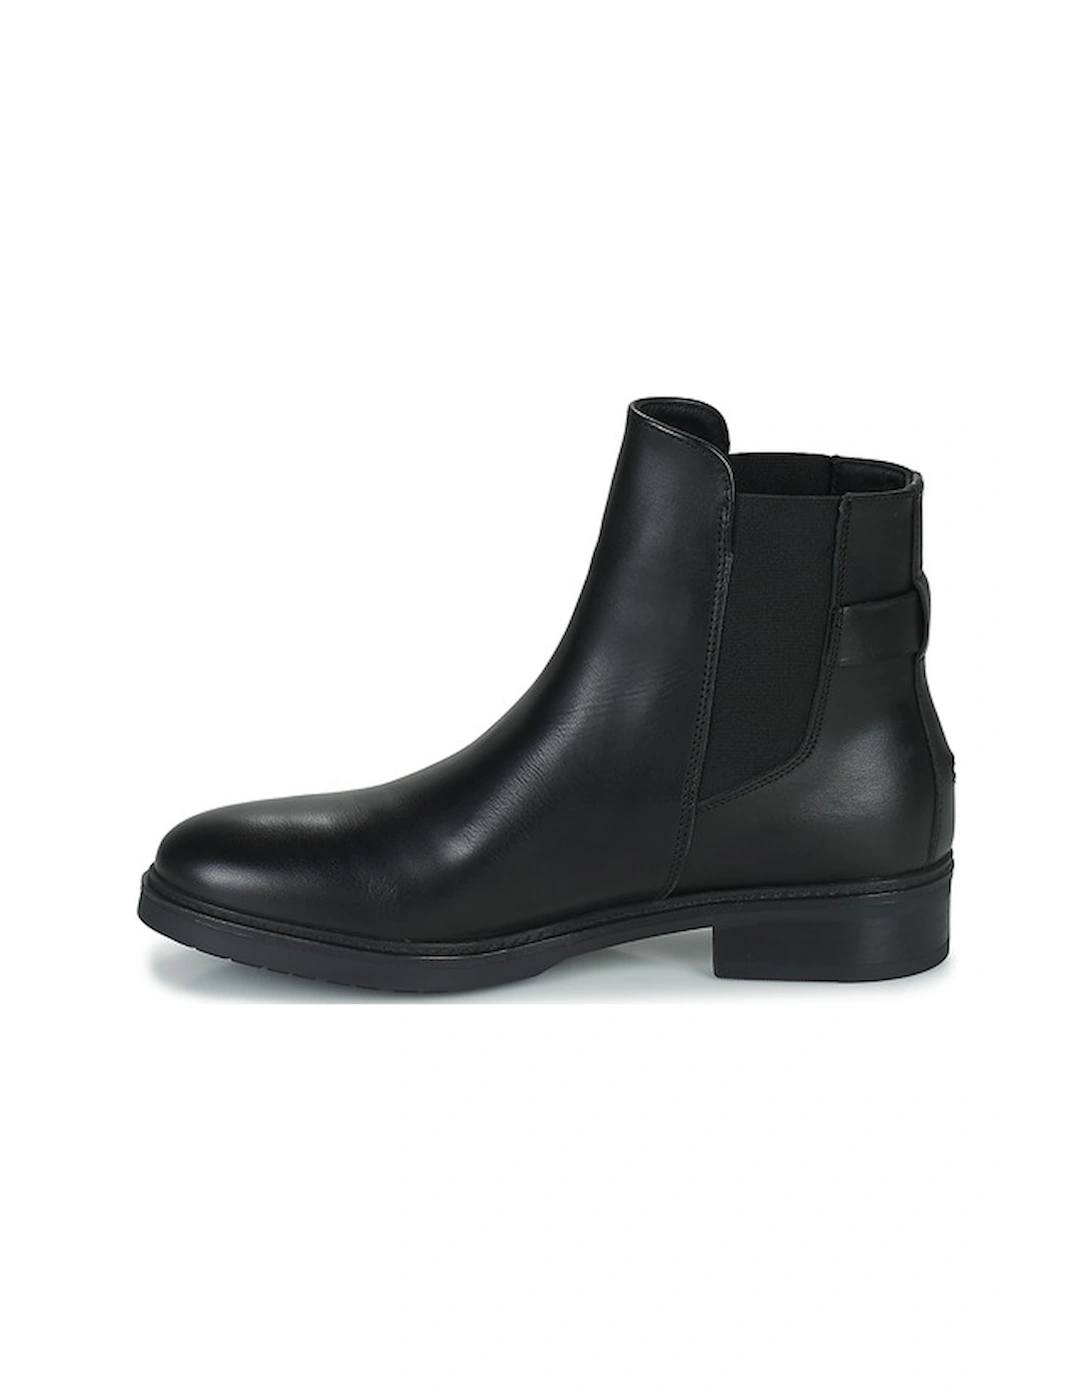 Coin Leather Flat Boot